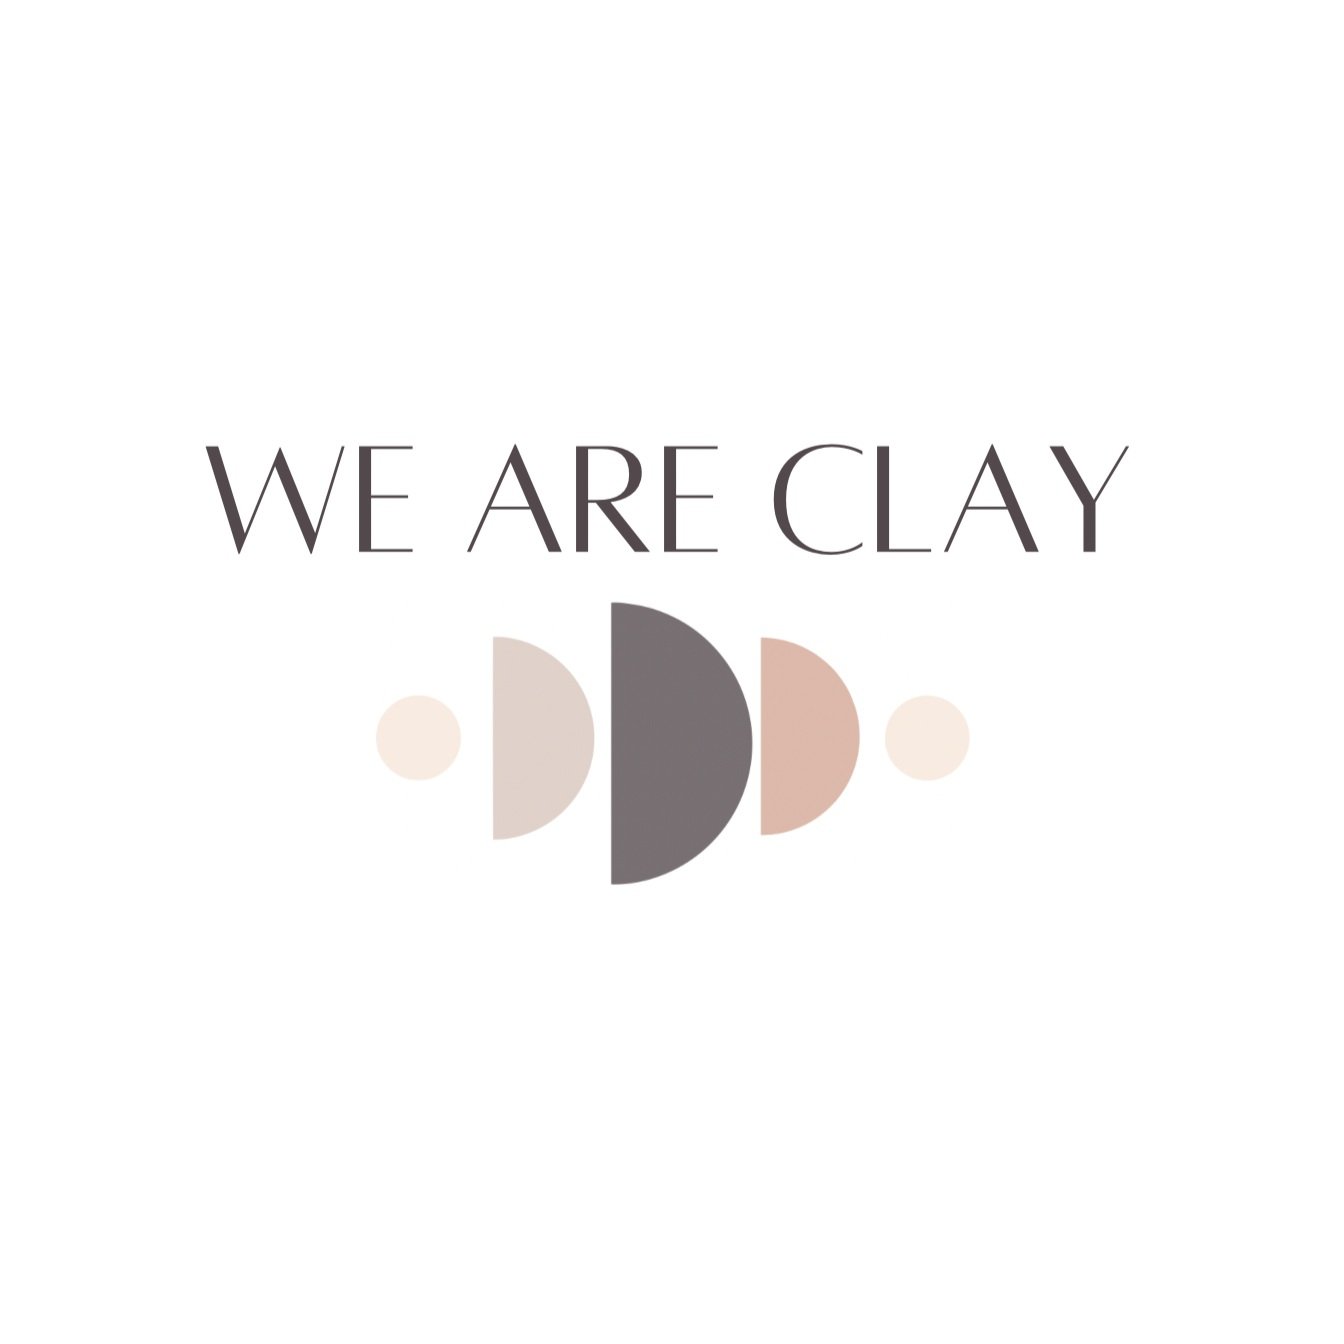 We Are Clay